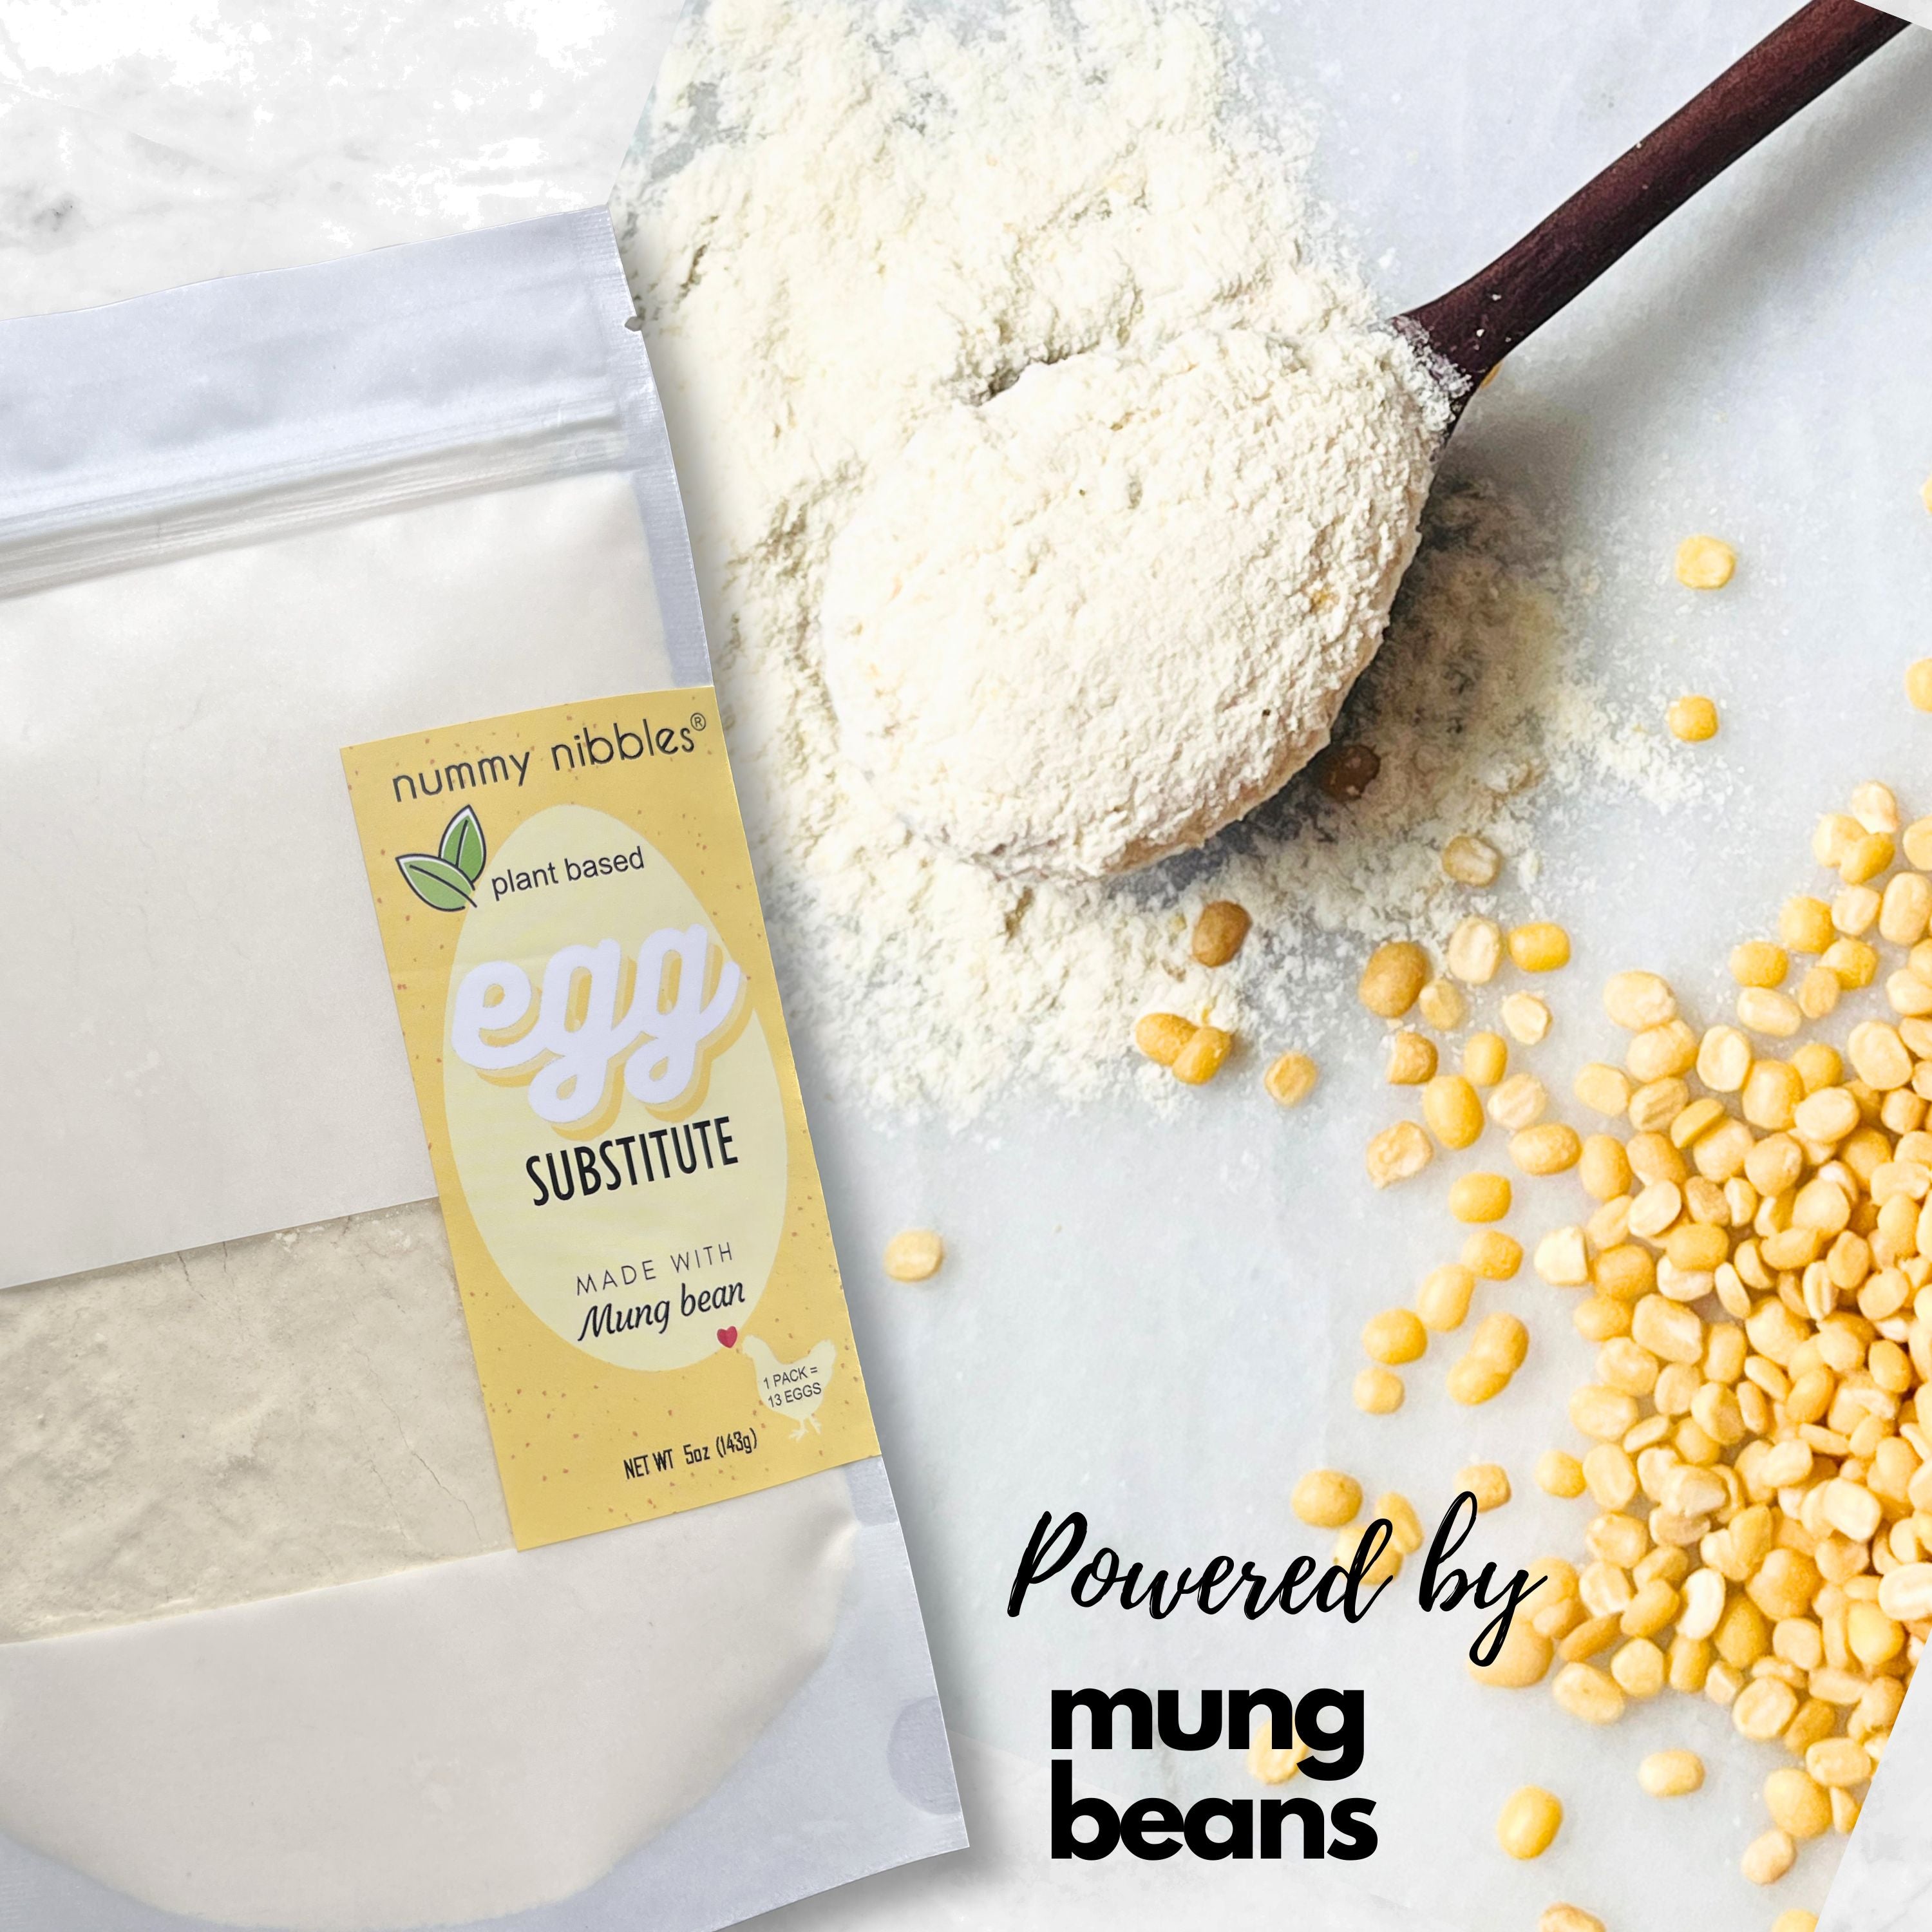 Nummy Nibbles Vegan Egg Substitute Powdered Mix with caption powered by mung beans